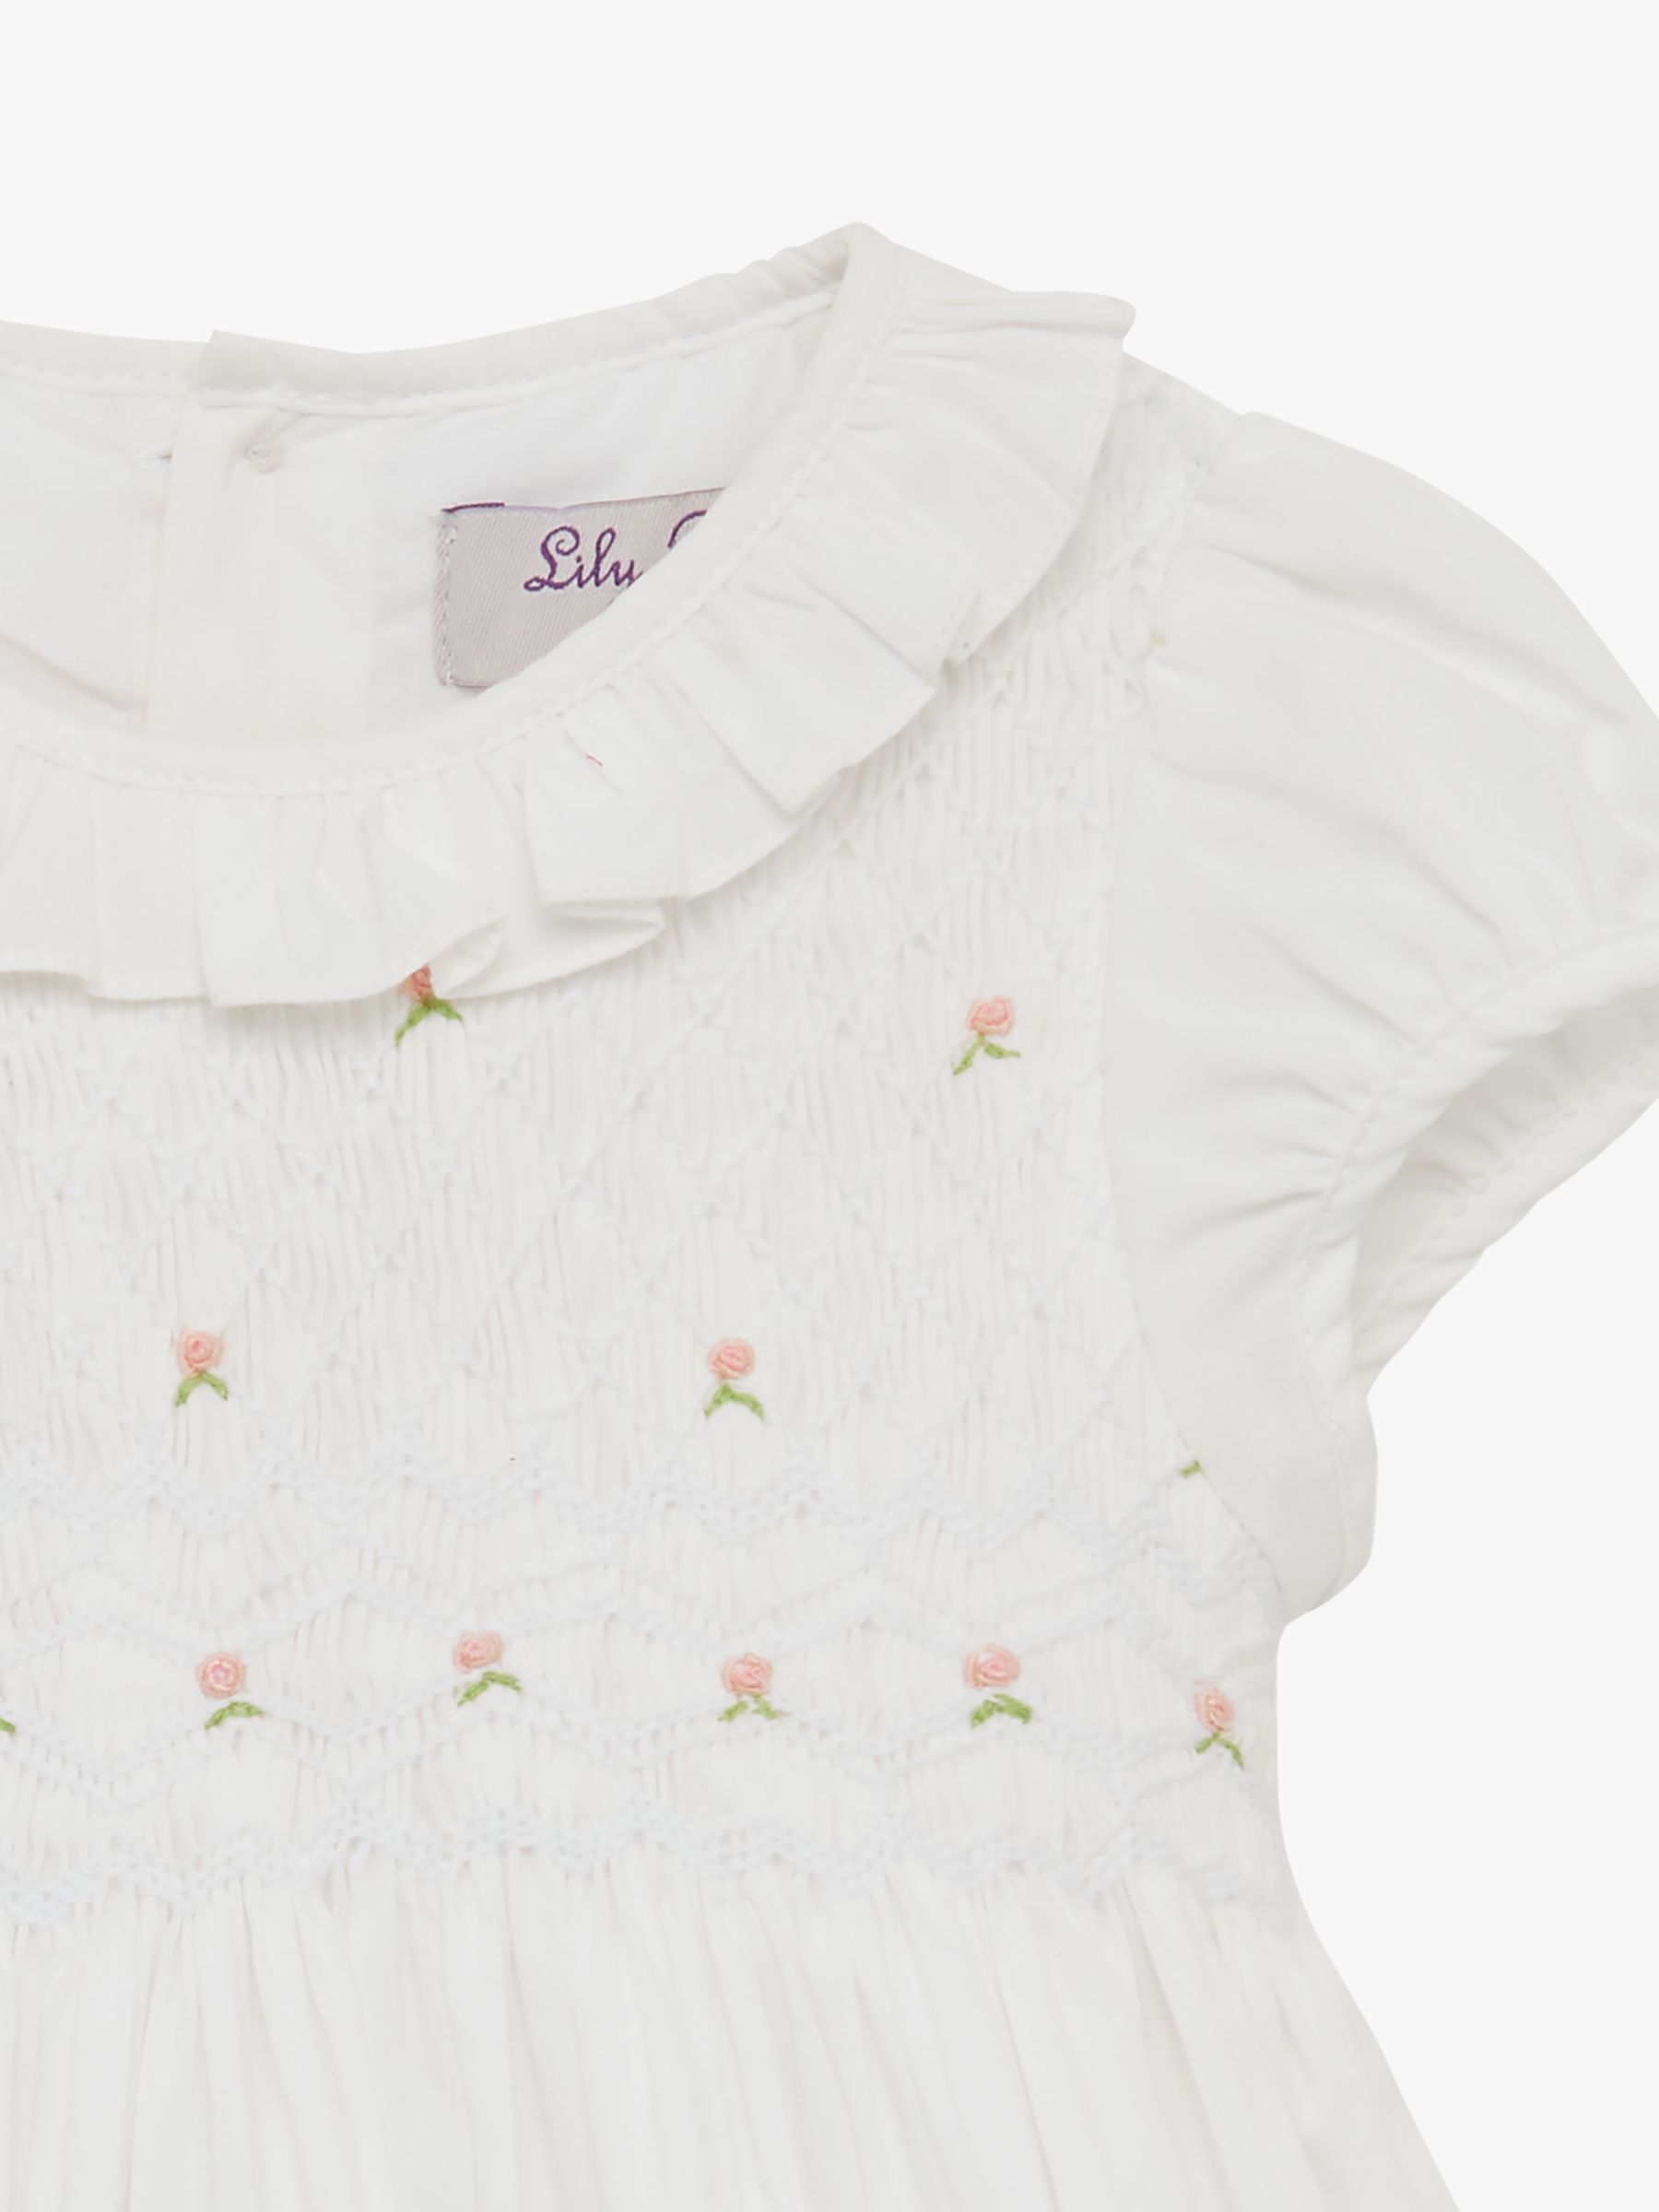 Buy Trotters Willow Kids Rose Hand-Smocked Dress, White Online at johnlewis.com